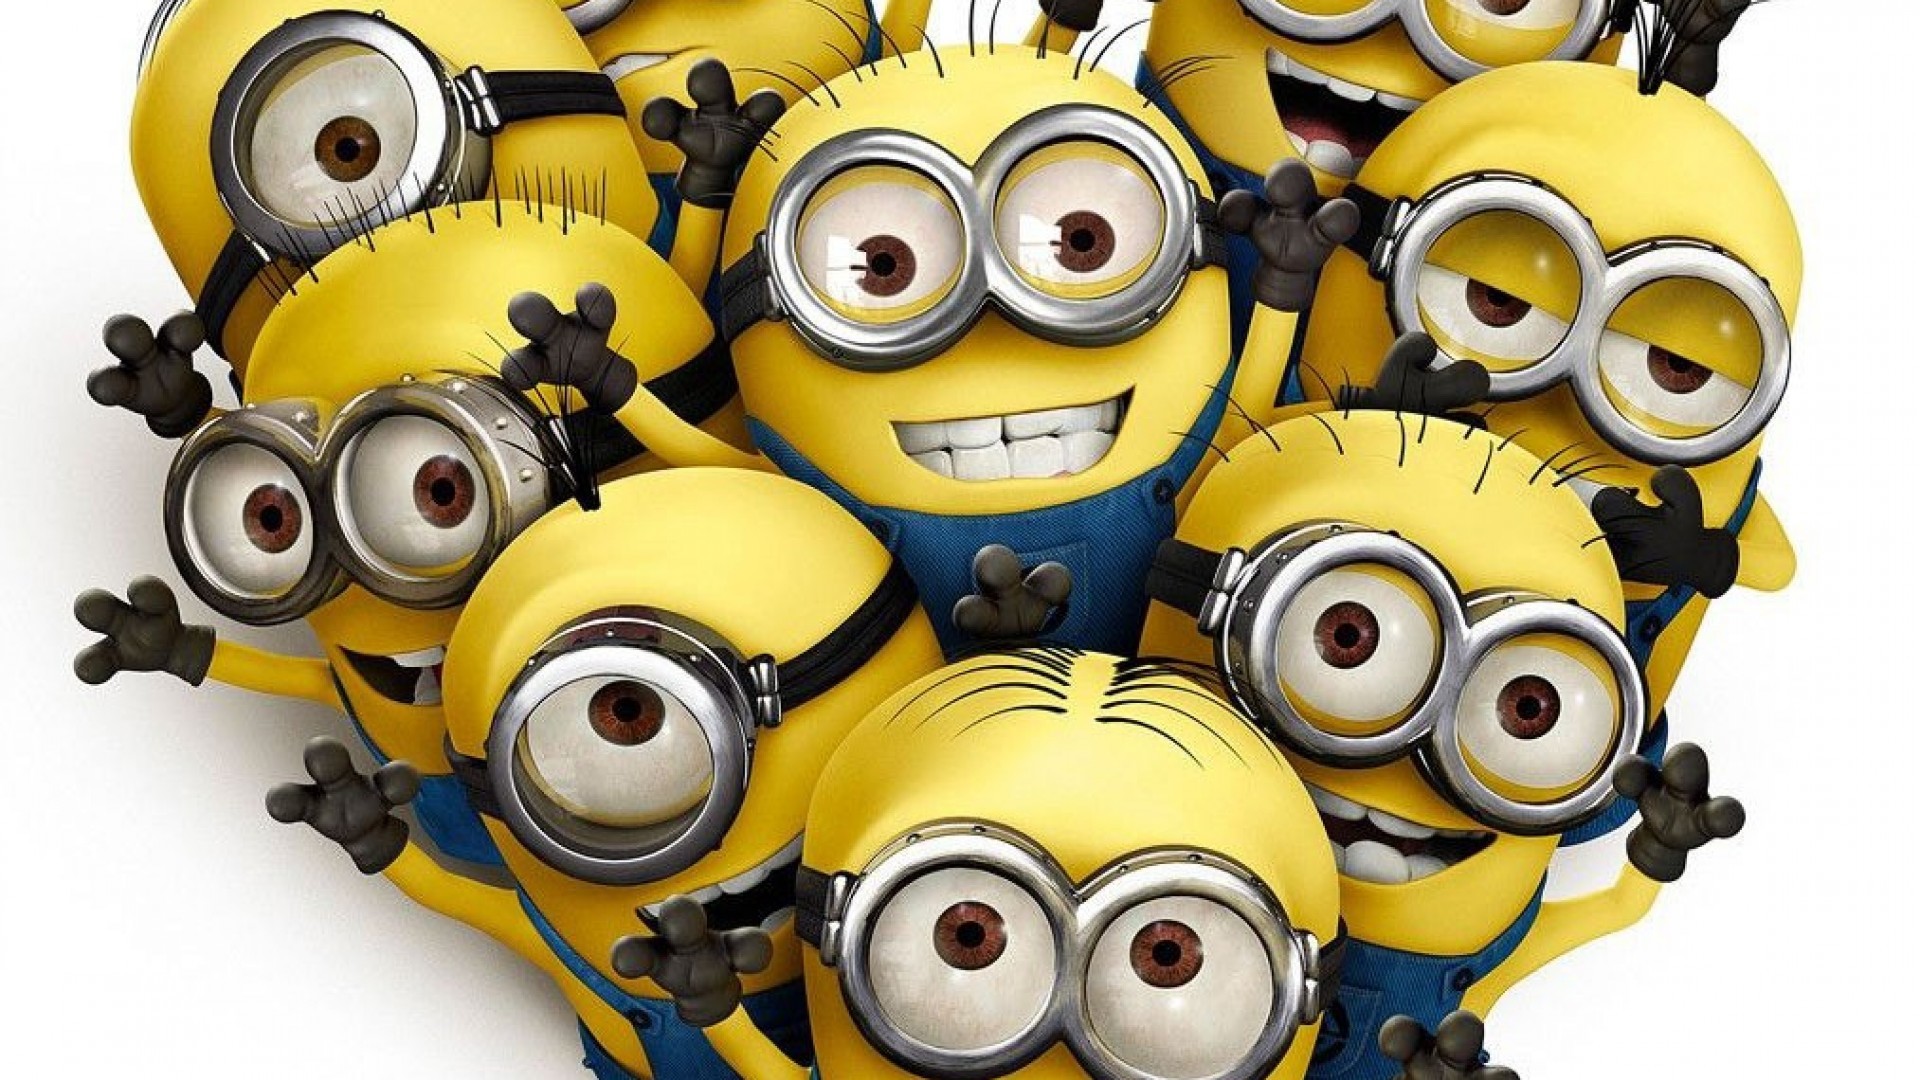 1920x1080 Minions wallpapers